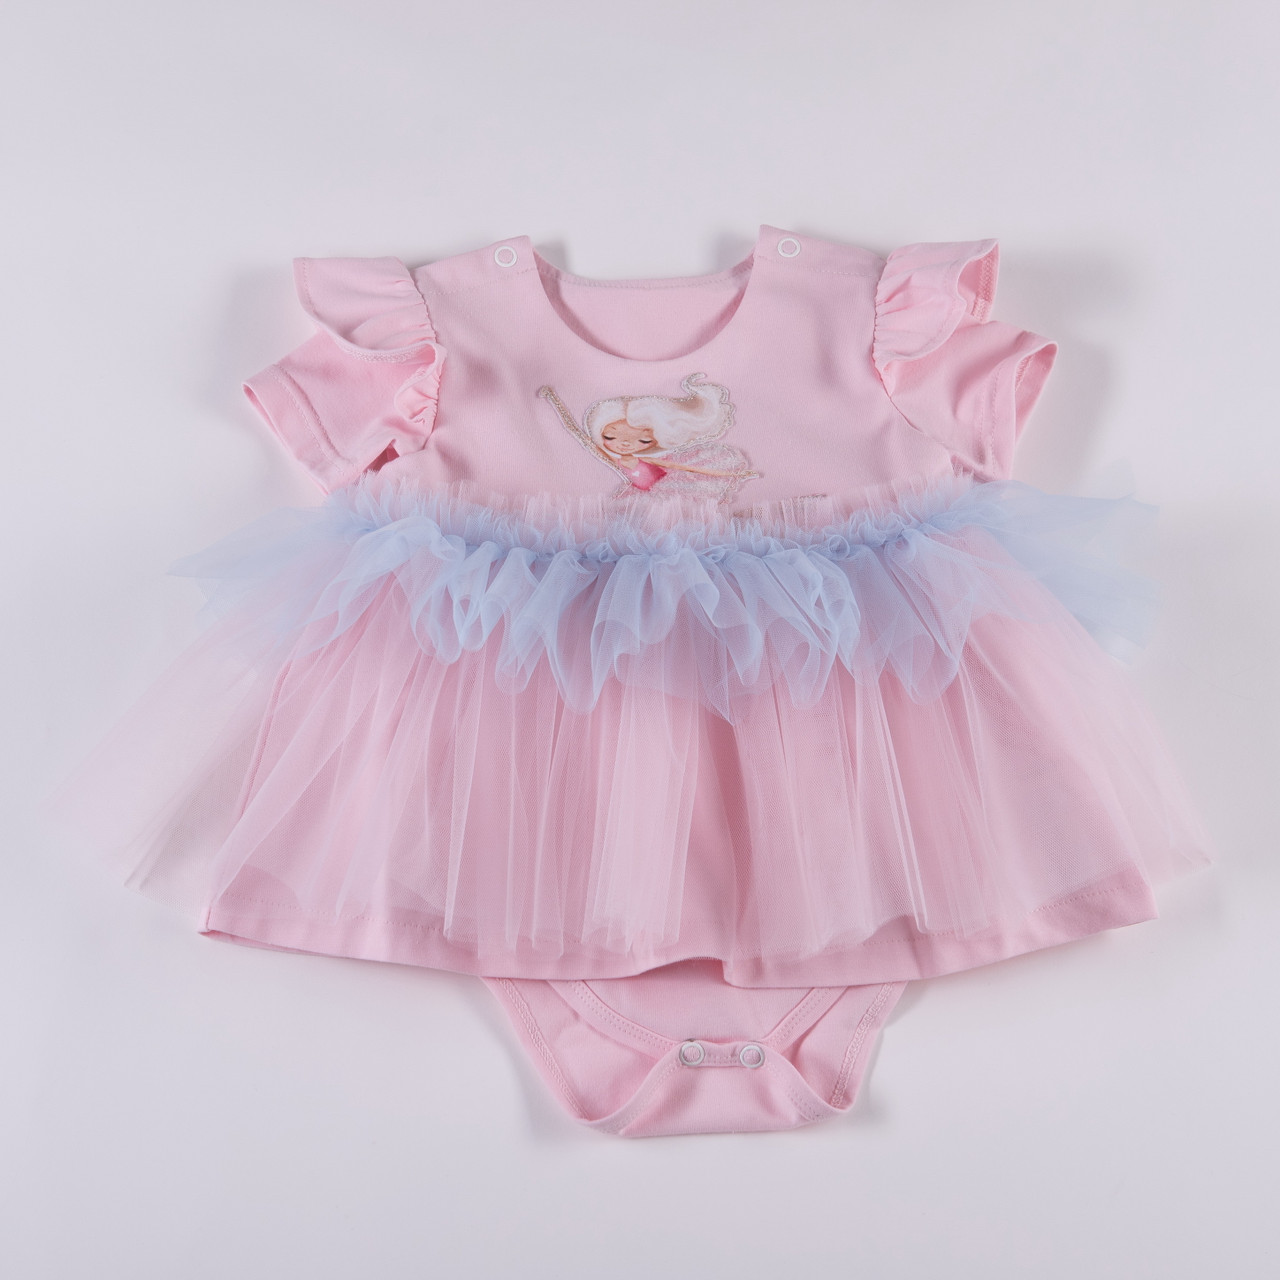 DAGA 9664 Swan Lake Baby Dress - Kiddie Boutique By Claire